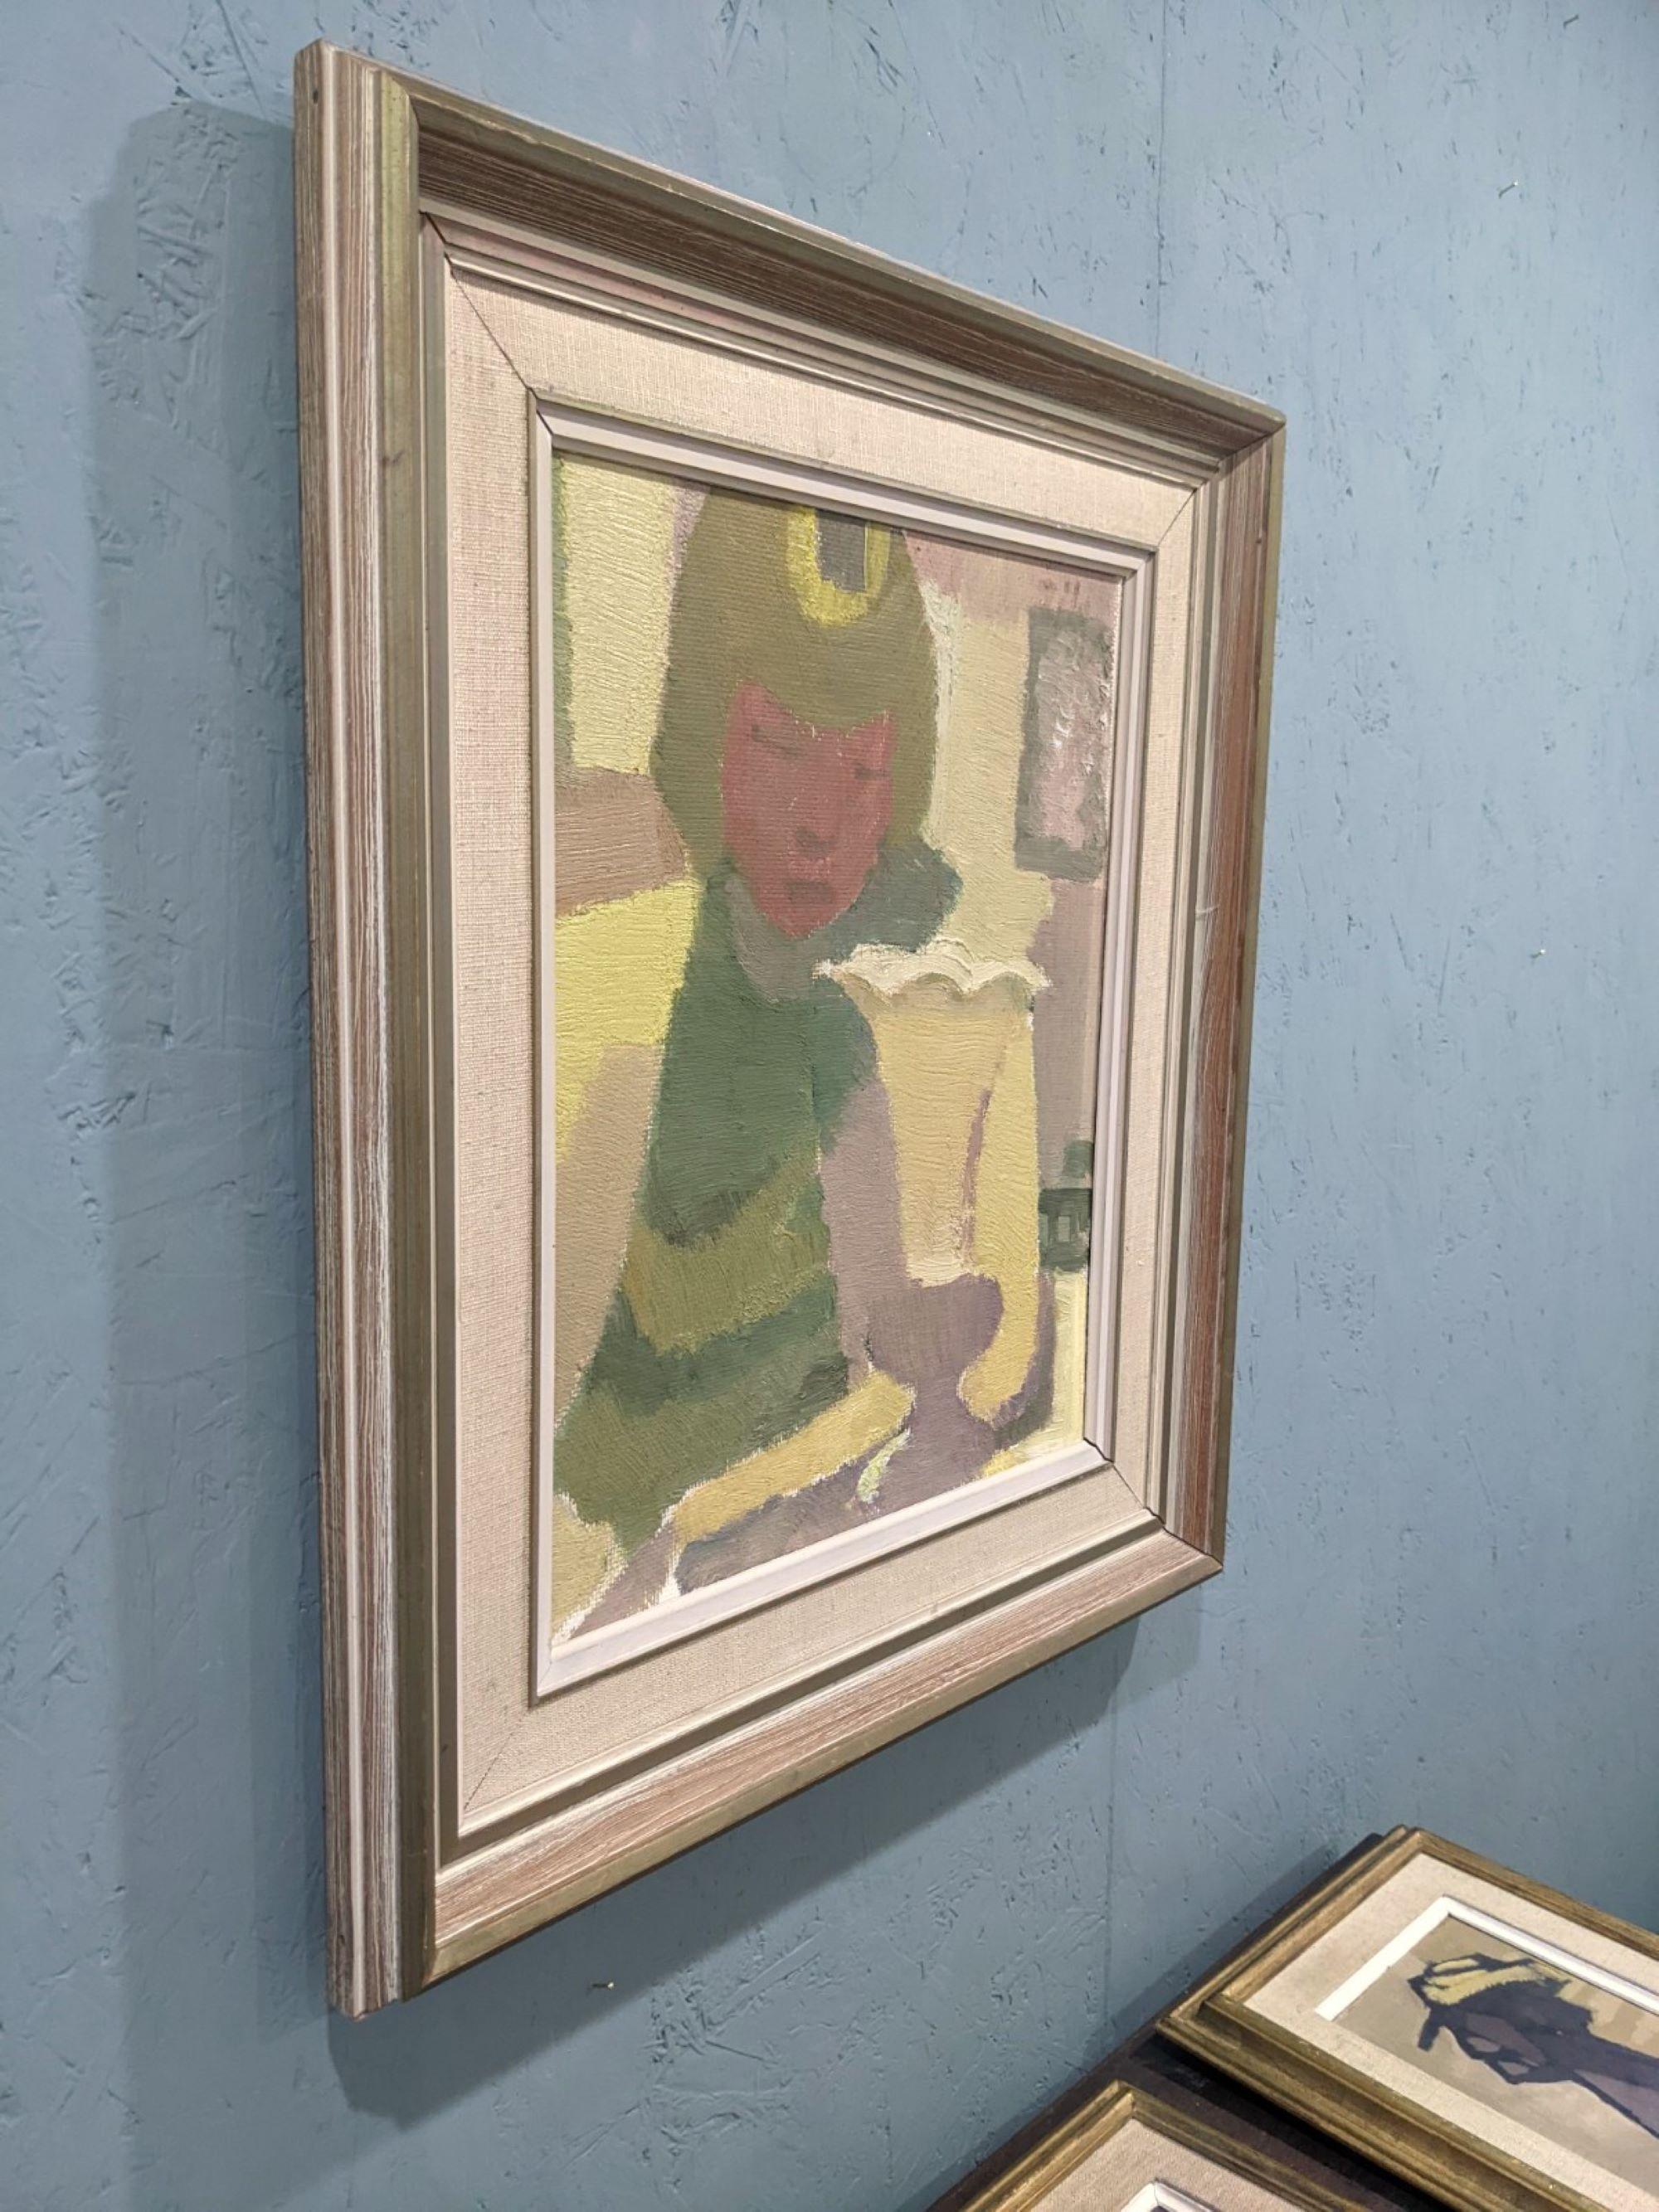 PORTRAIT IN AN INTERIOR
Size: 57 x 49.5 cm (including frame)
Oil on board

A beautifully executed and subtle mid century modernist portrait, executed in oil onto board.

This semi-abstract composition depicts a female figure in an interior setting,